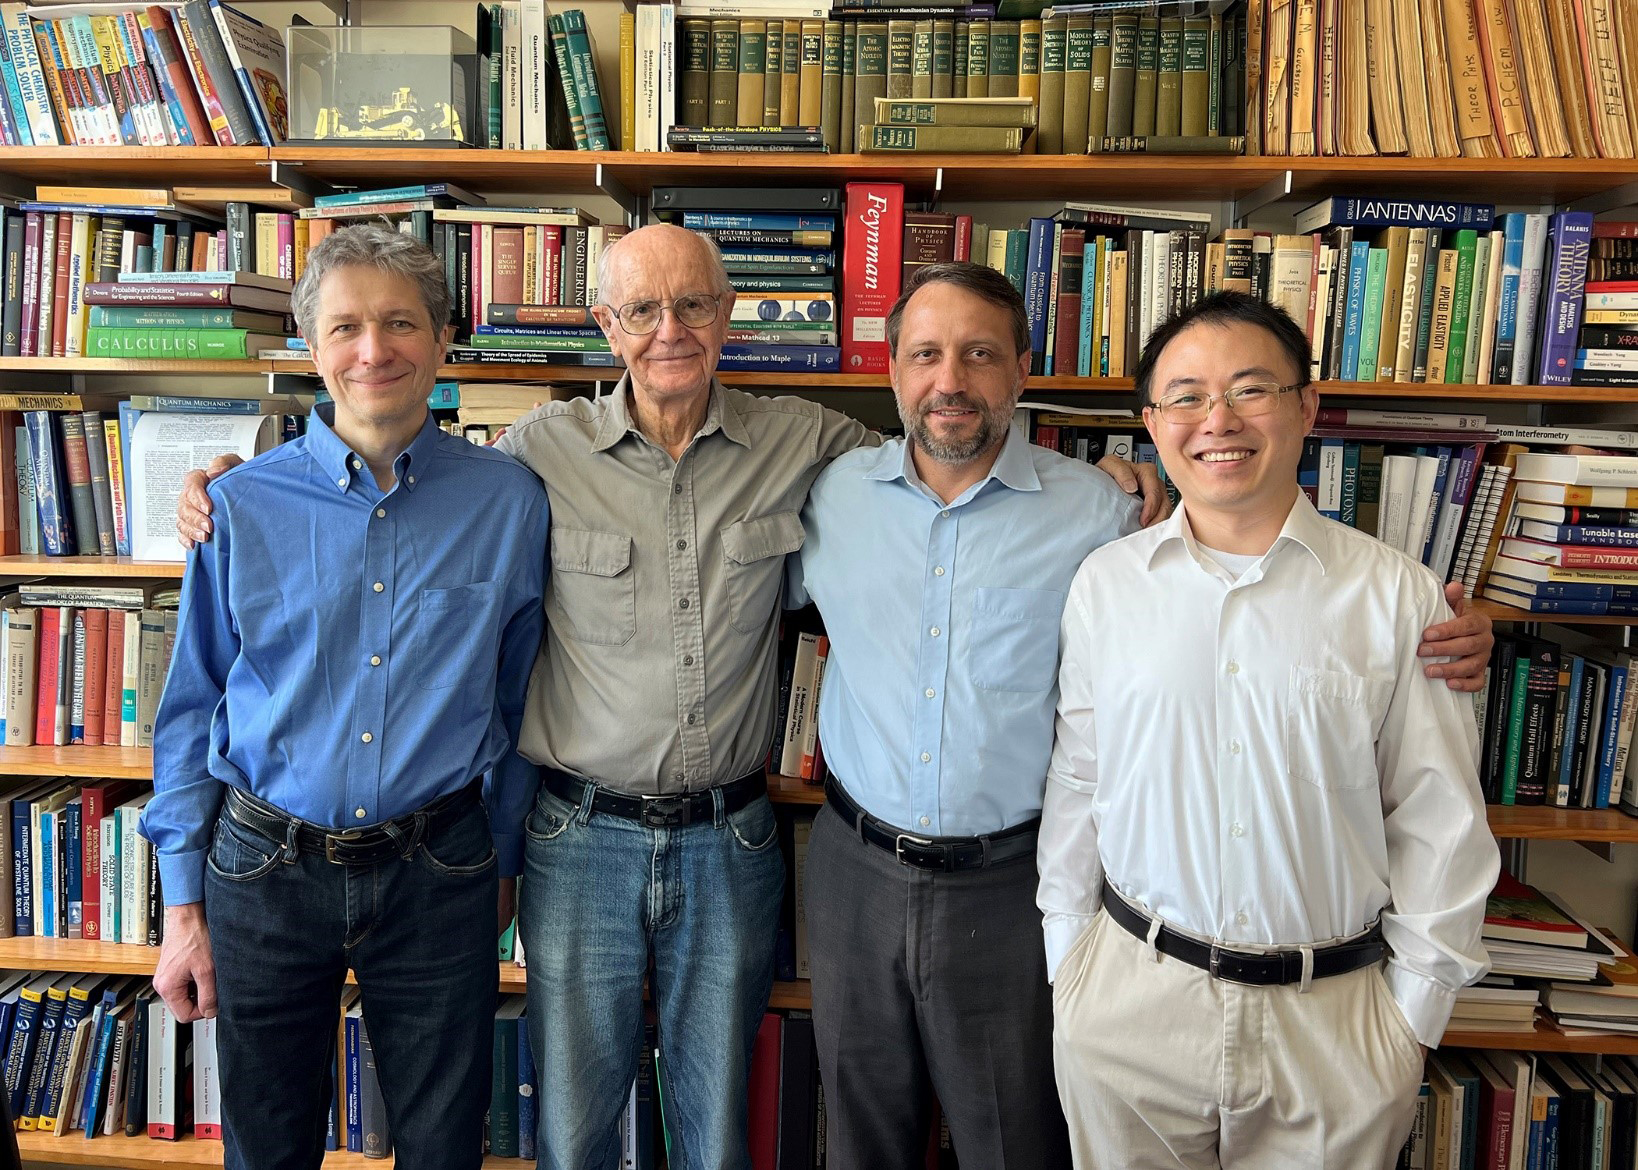 Texas A&M University physicists (from left) Dr. Aleksei Zheltikov, Dr. Marlan Scully, Dr. Alexei Sokolov and Dr. Zhenhuan Yi pose in the Institute for Quantum Science and Engineering library on the Texas A&M campus